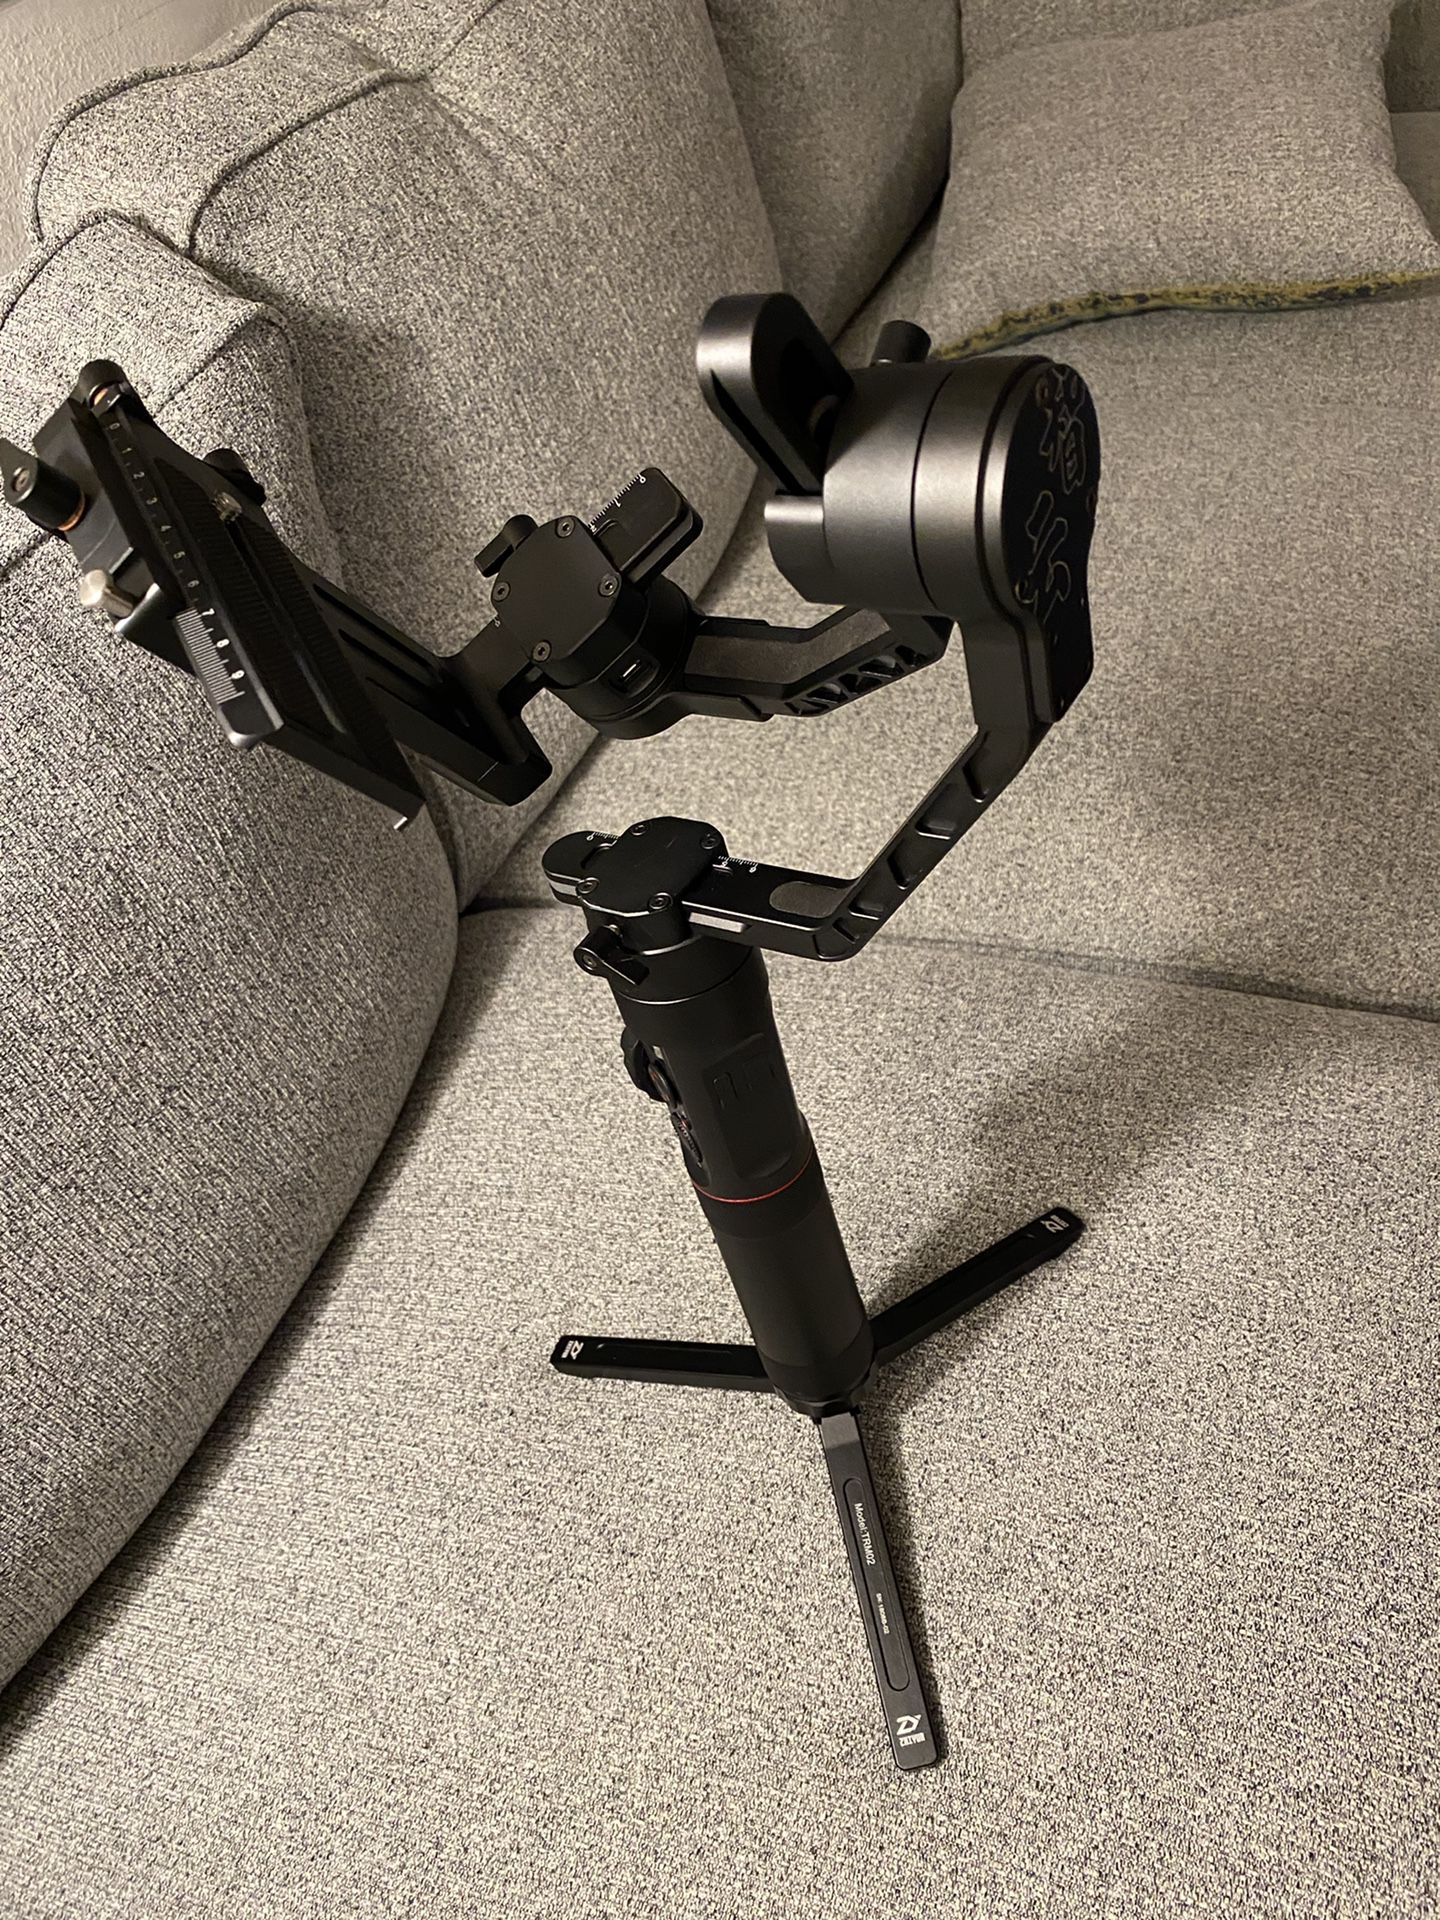 Zhiyun crane 2 (with Servo Follow Focus) buy from Amazon, like new, used 6time now sale ＄335